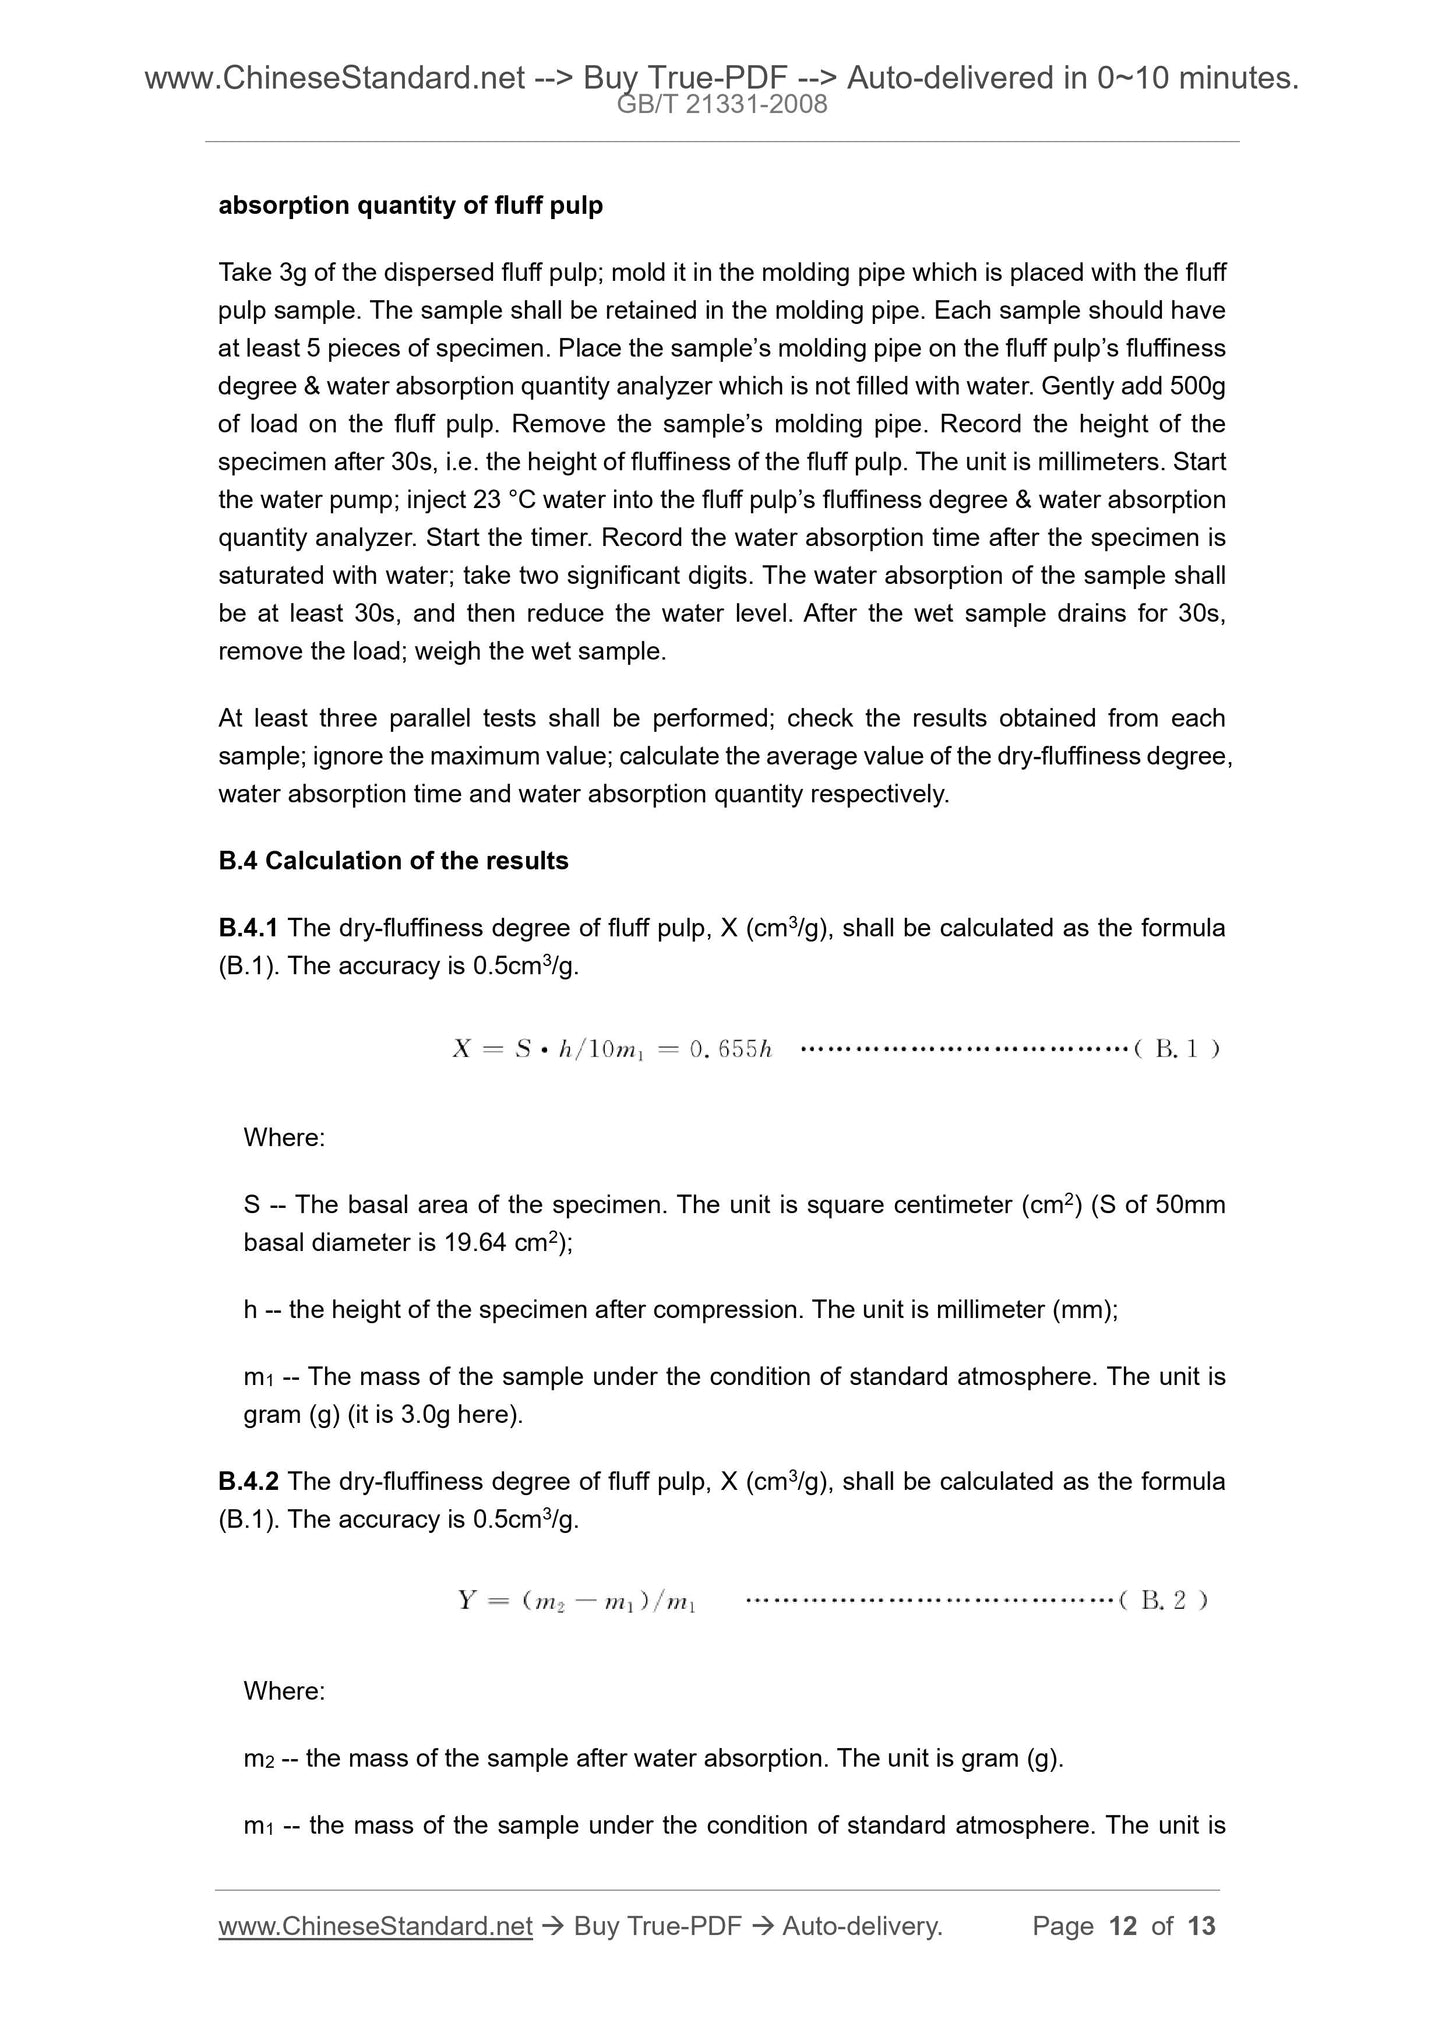 GB/T 21331-2008 Page 6